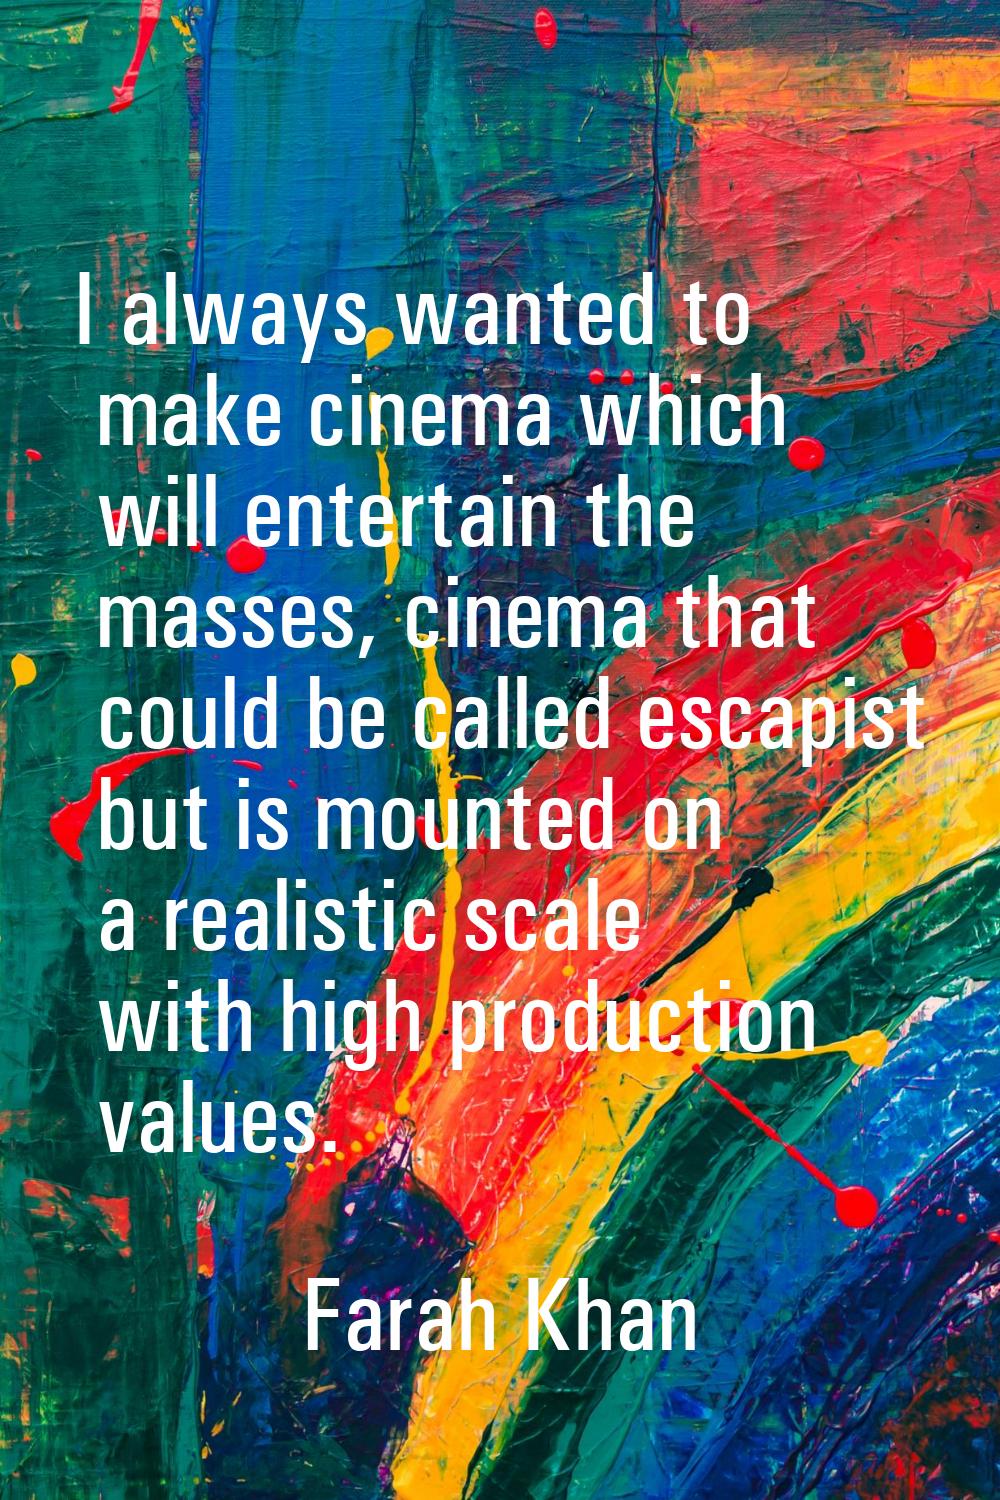 I always wanted to make cinema which will entertain the masses, cinema that could be called escapis